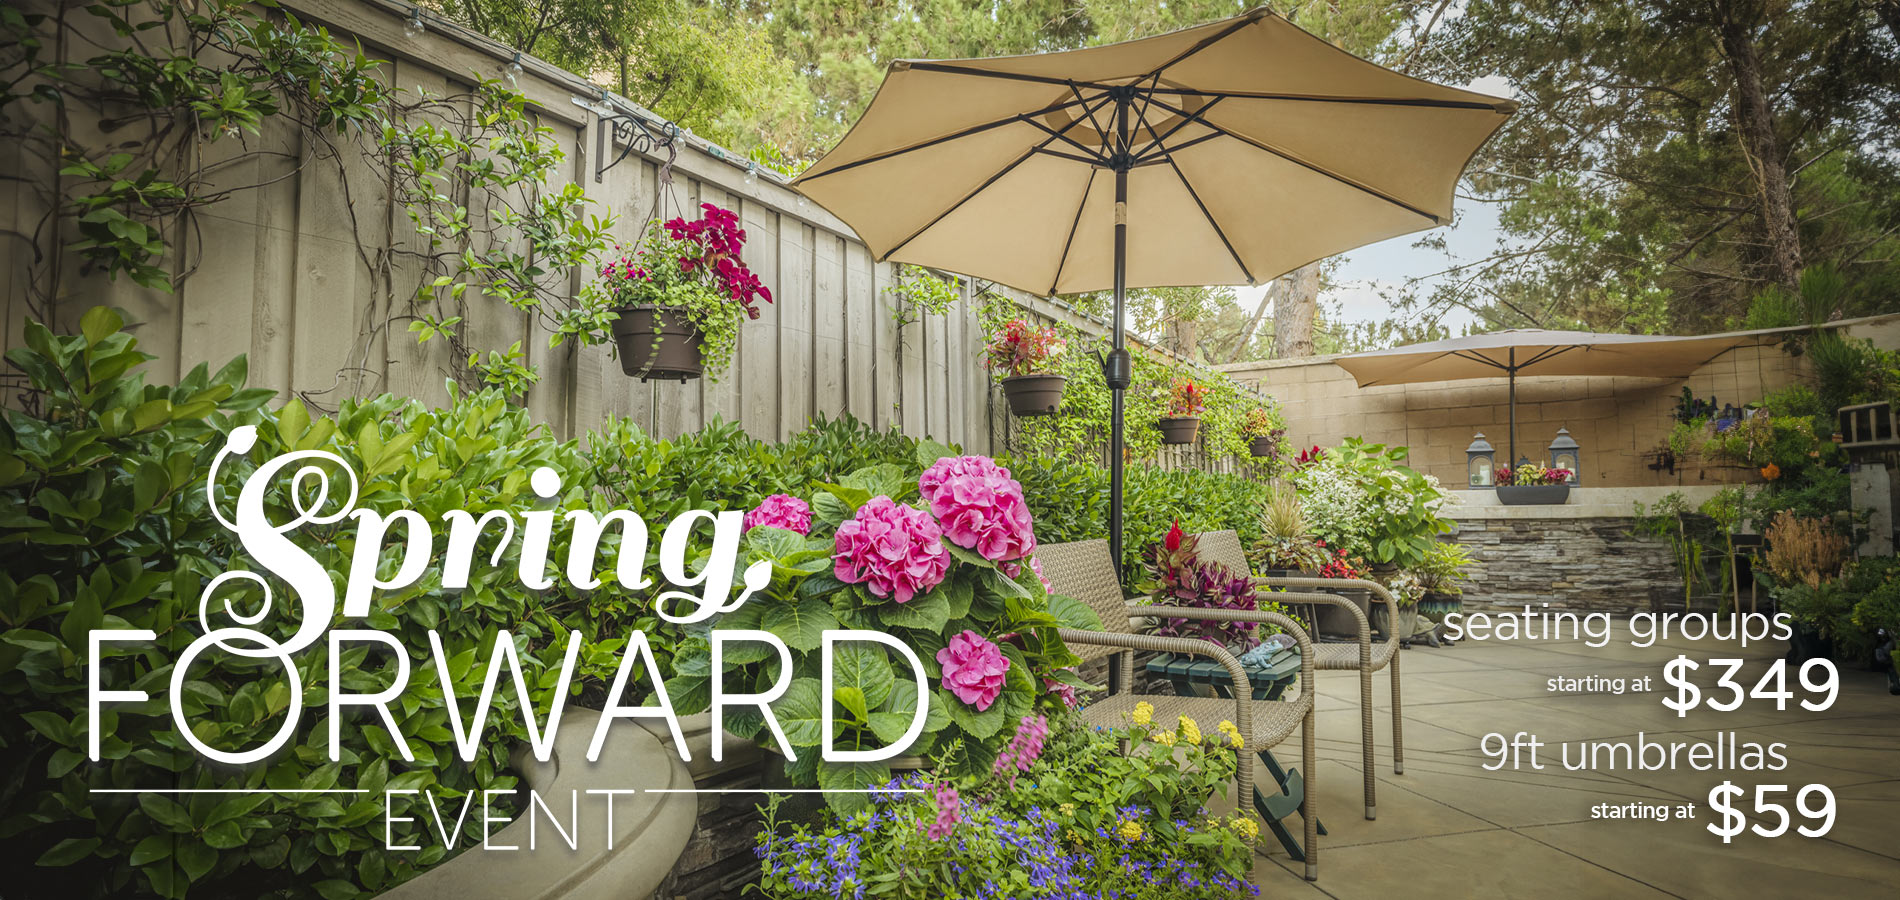 The Spring Forward Event Starts Now! Save on your dream patio, with seating groups starting at $349 and 9 ft umbrellas starting at $59